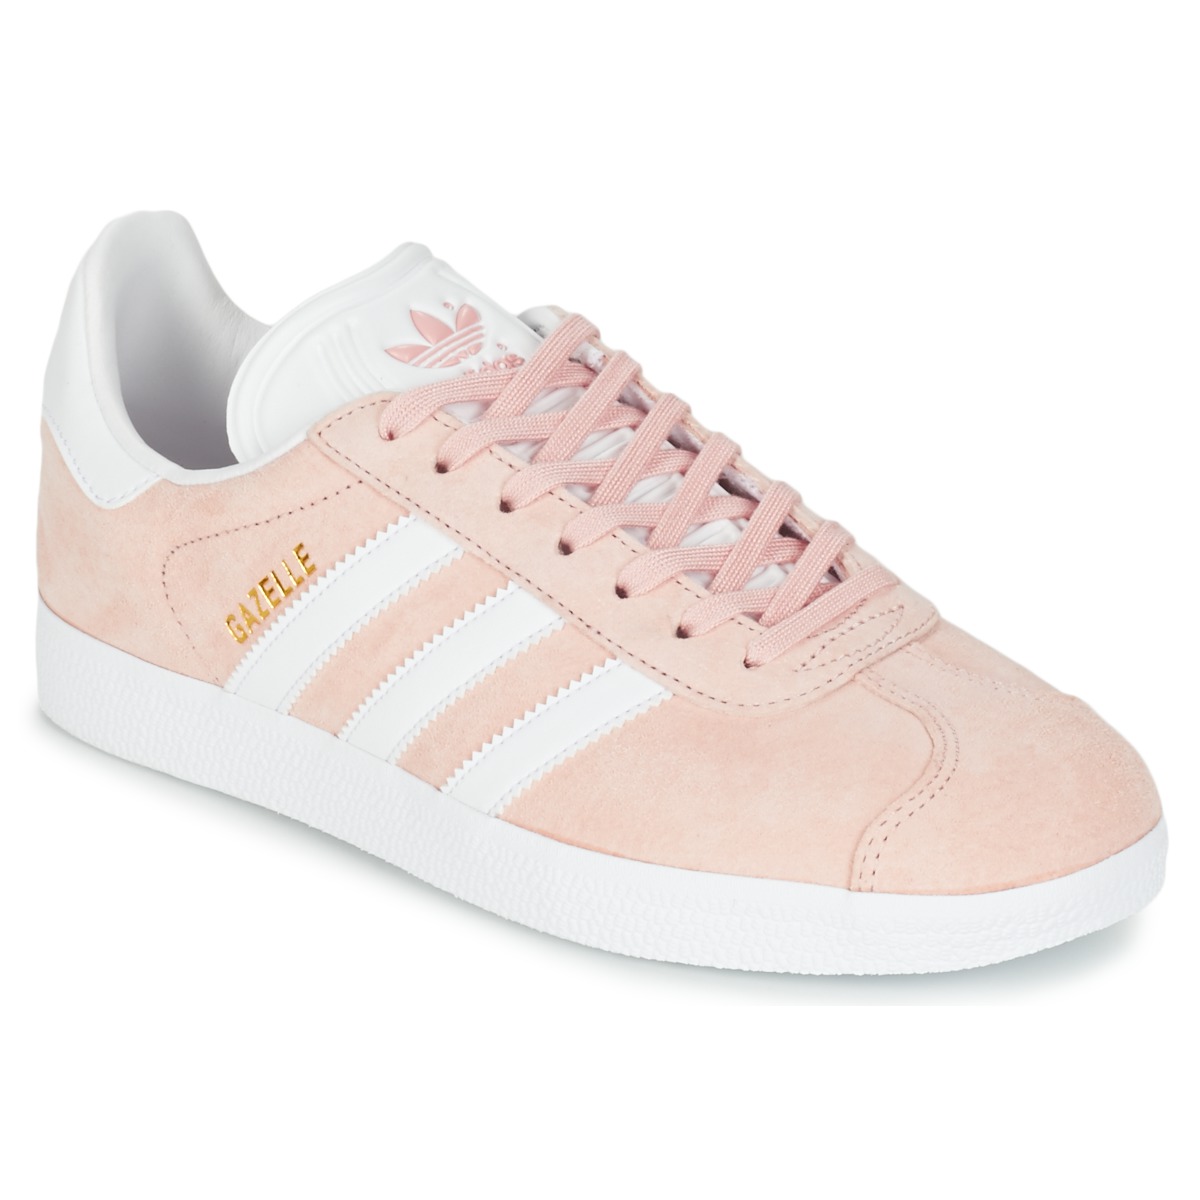 Democratic Party Ladder Duplicate adidas Originals GAZELLE Pink - Free delivery | Spartoo NET ! - Shoes Low  top trainers Women USD/$84.00